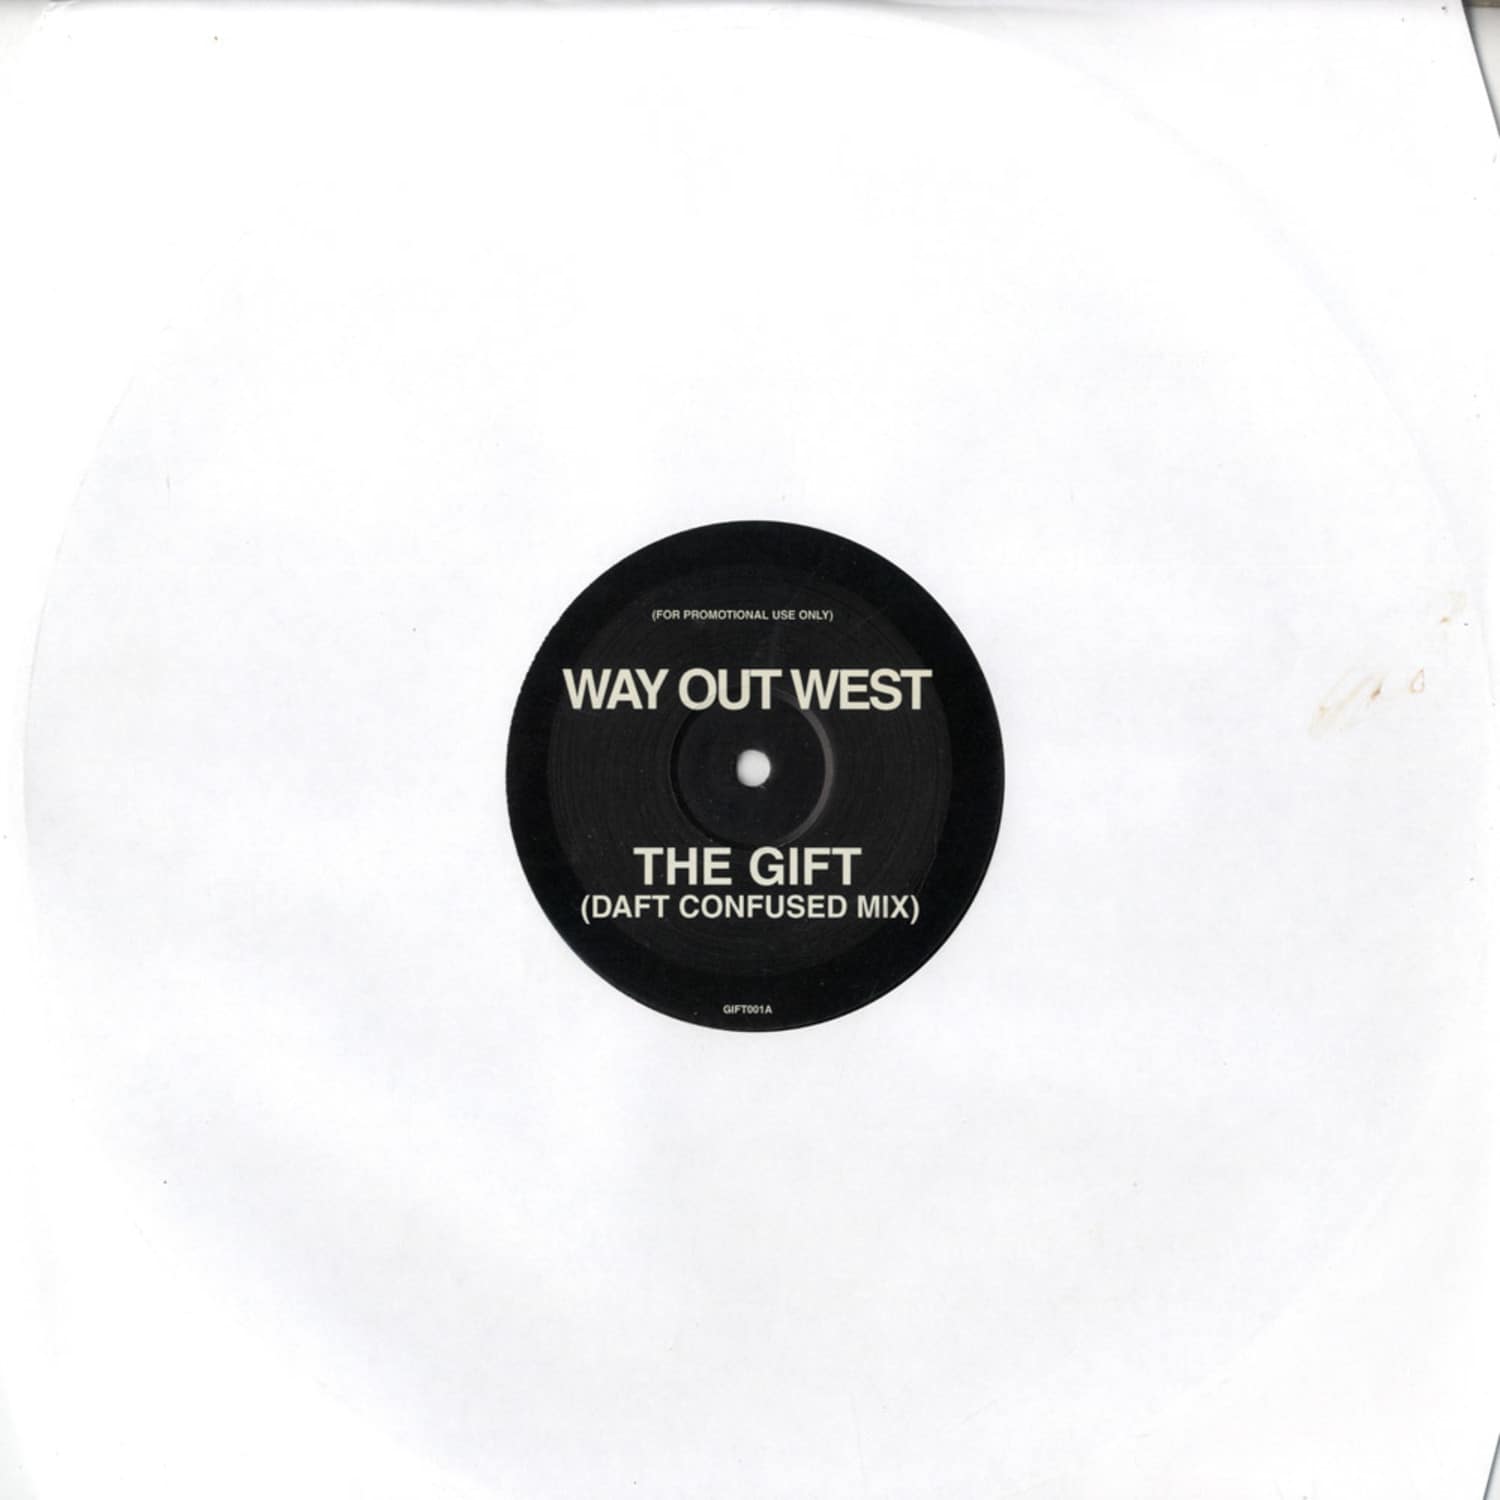 Way Out West - THE GIFT DAFT CONFUSED MIX